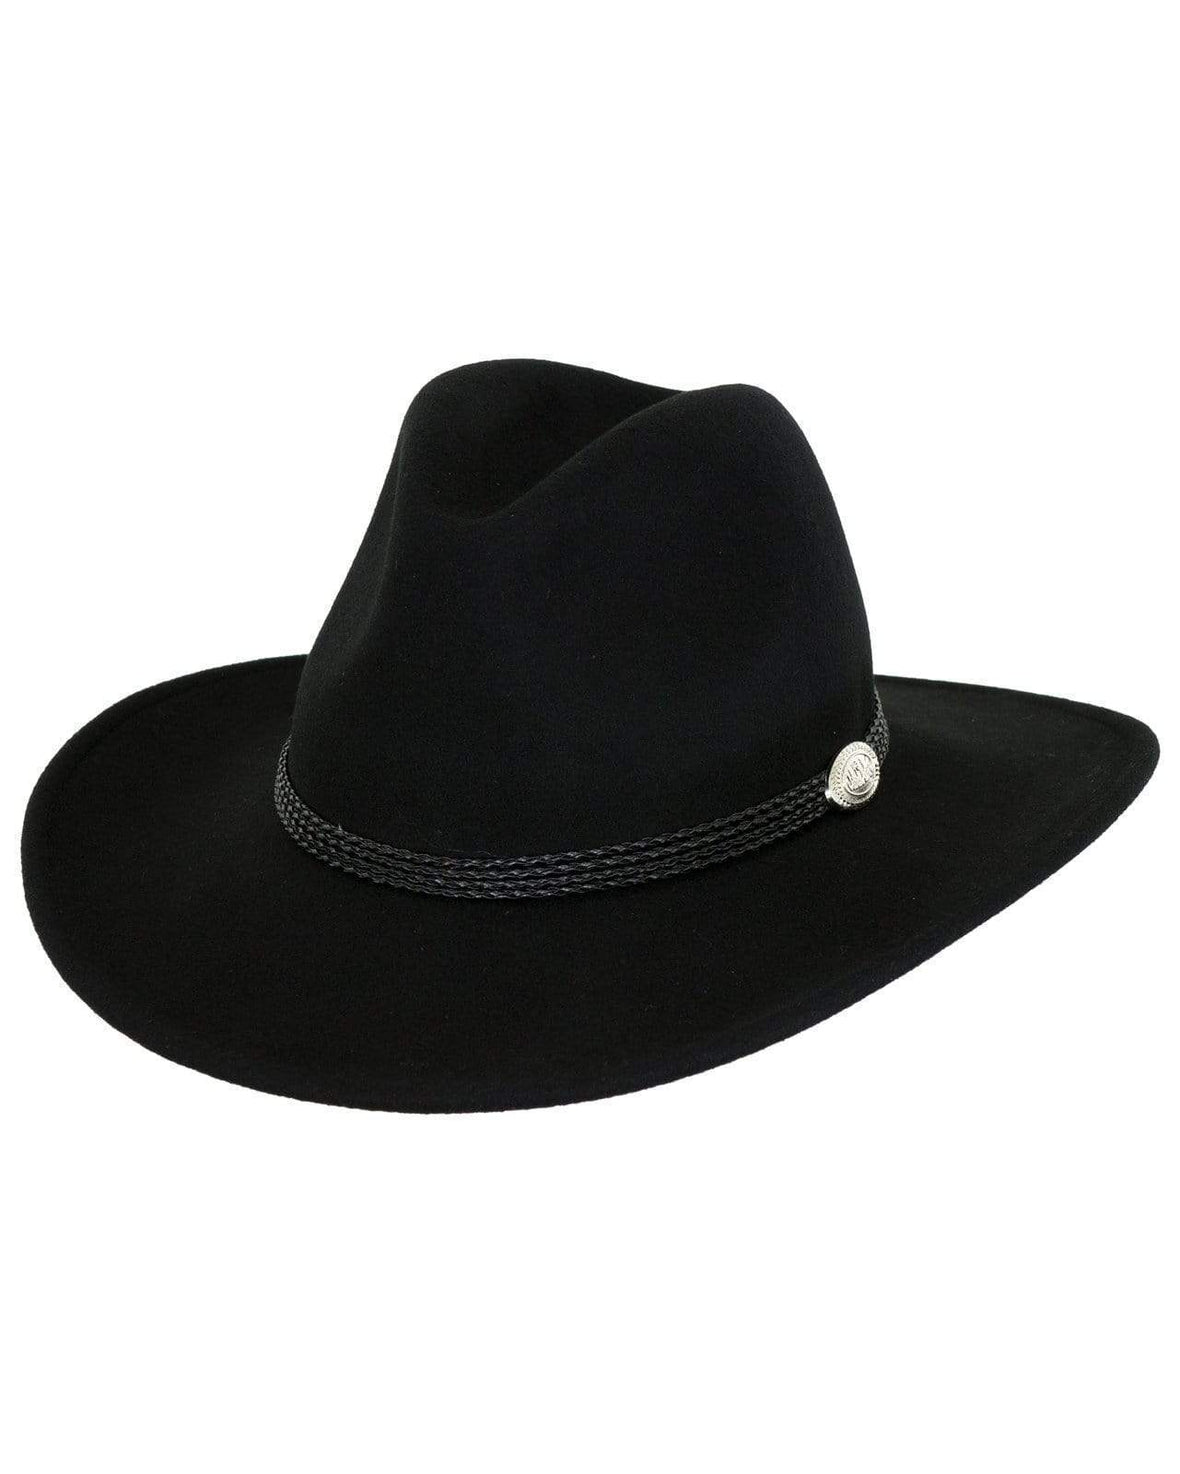 Shy Game | Wool Felt Hats by Outback Trading Company | OutbackTrading.com